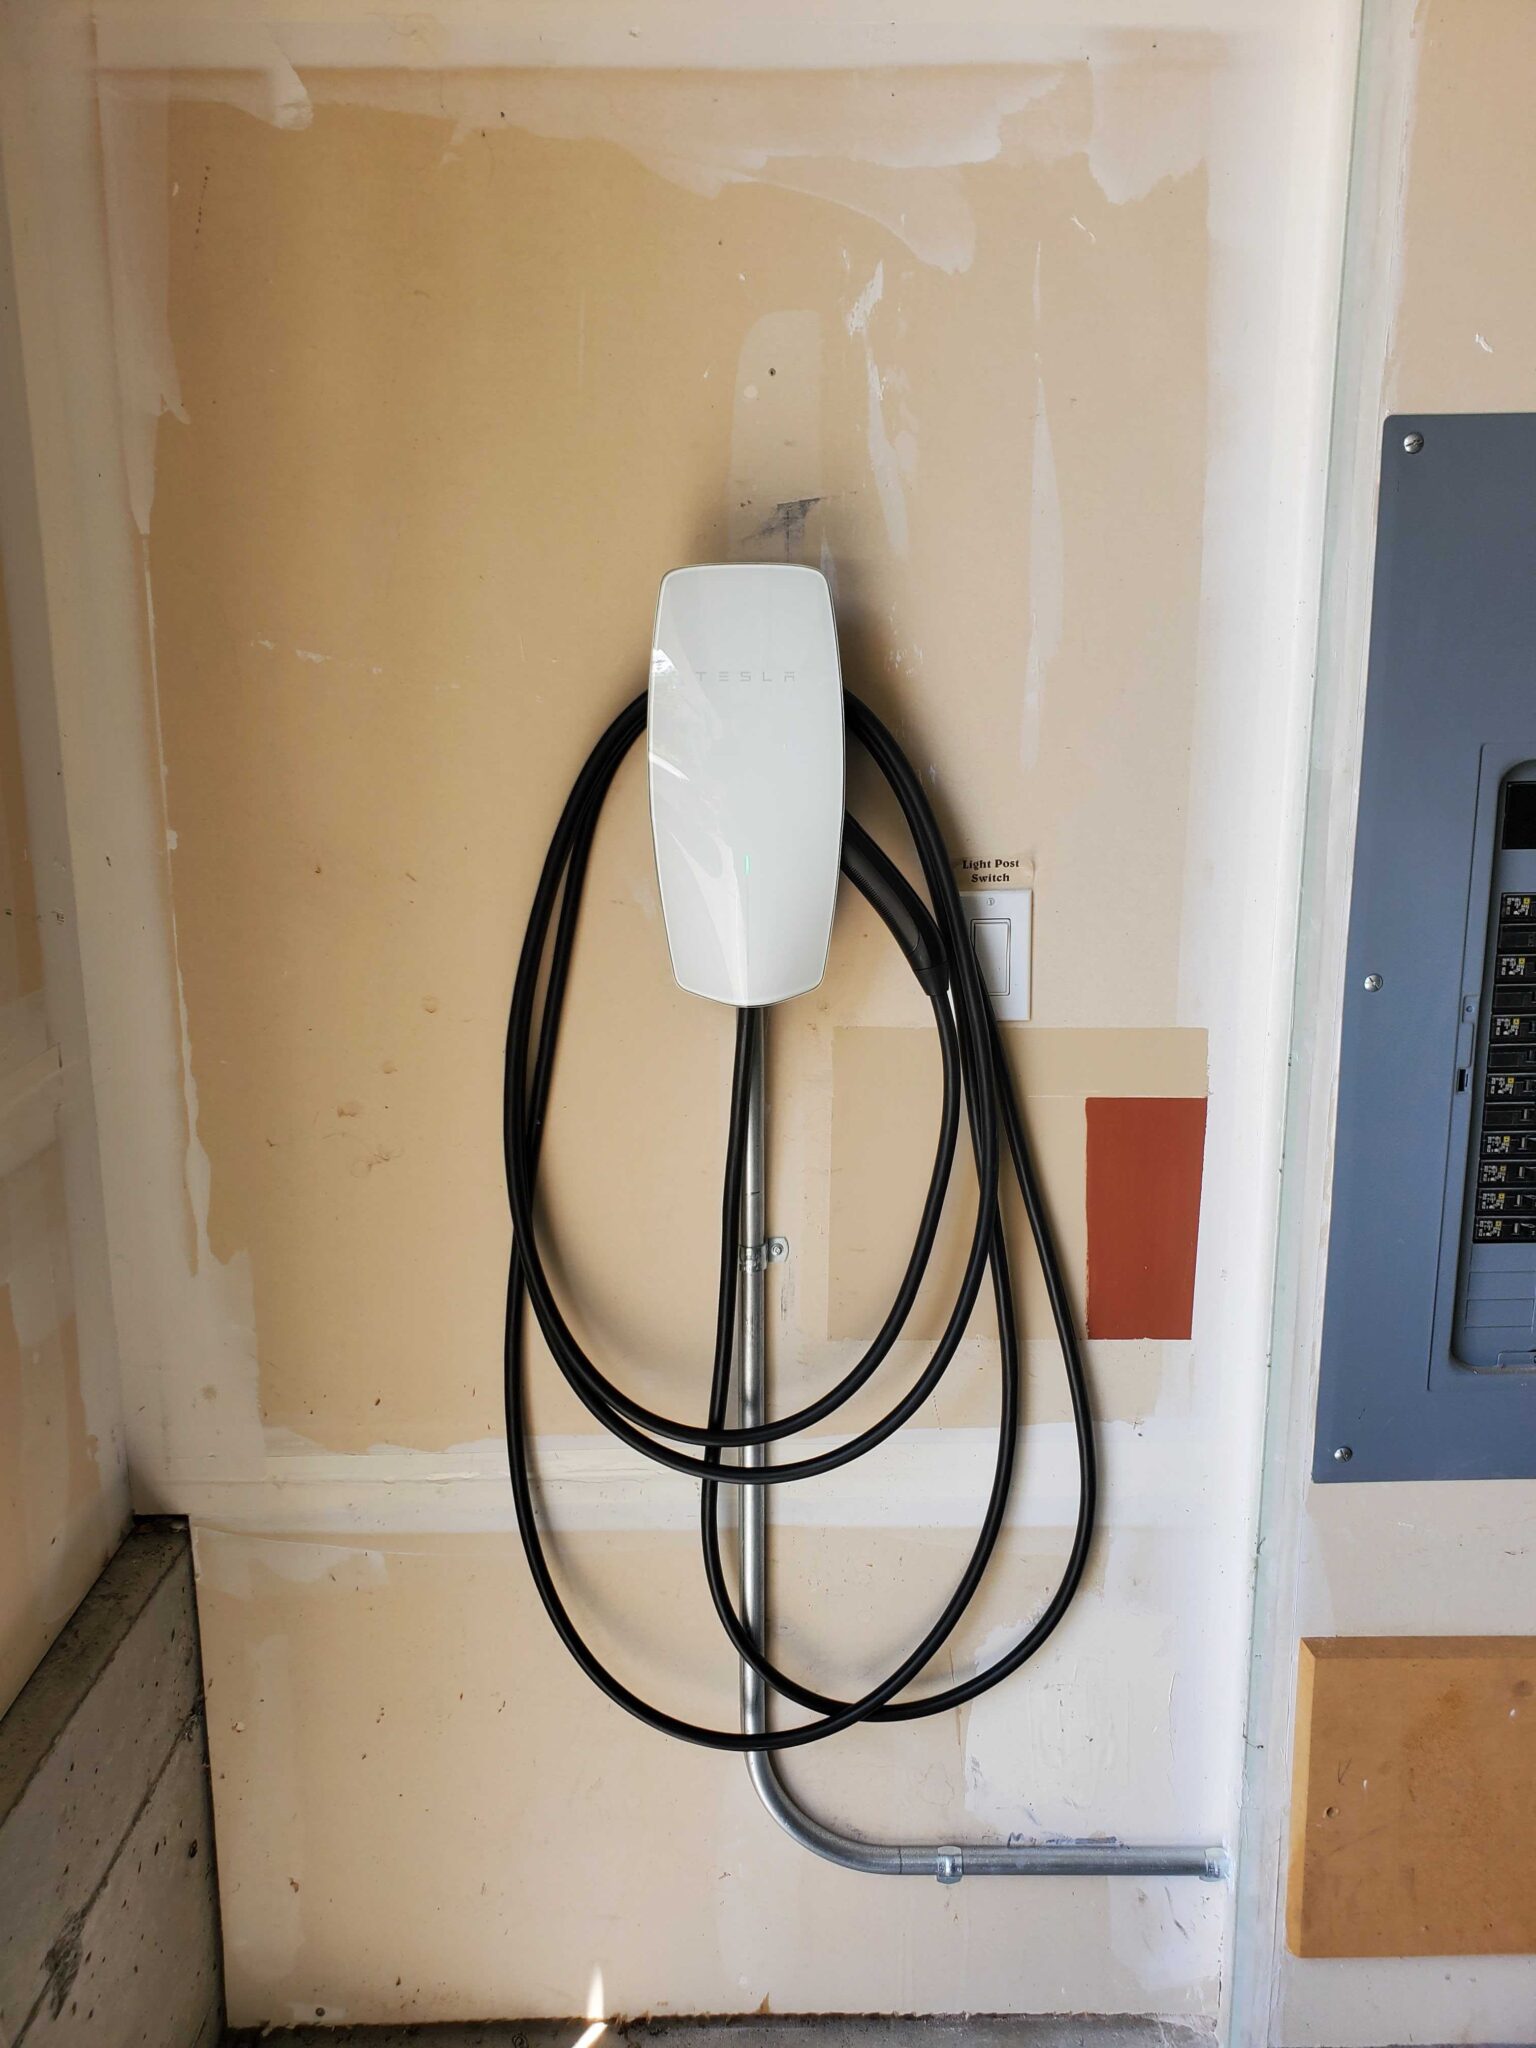 Hard Wired Tesla Level 2 charger with exposed EMT